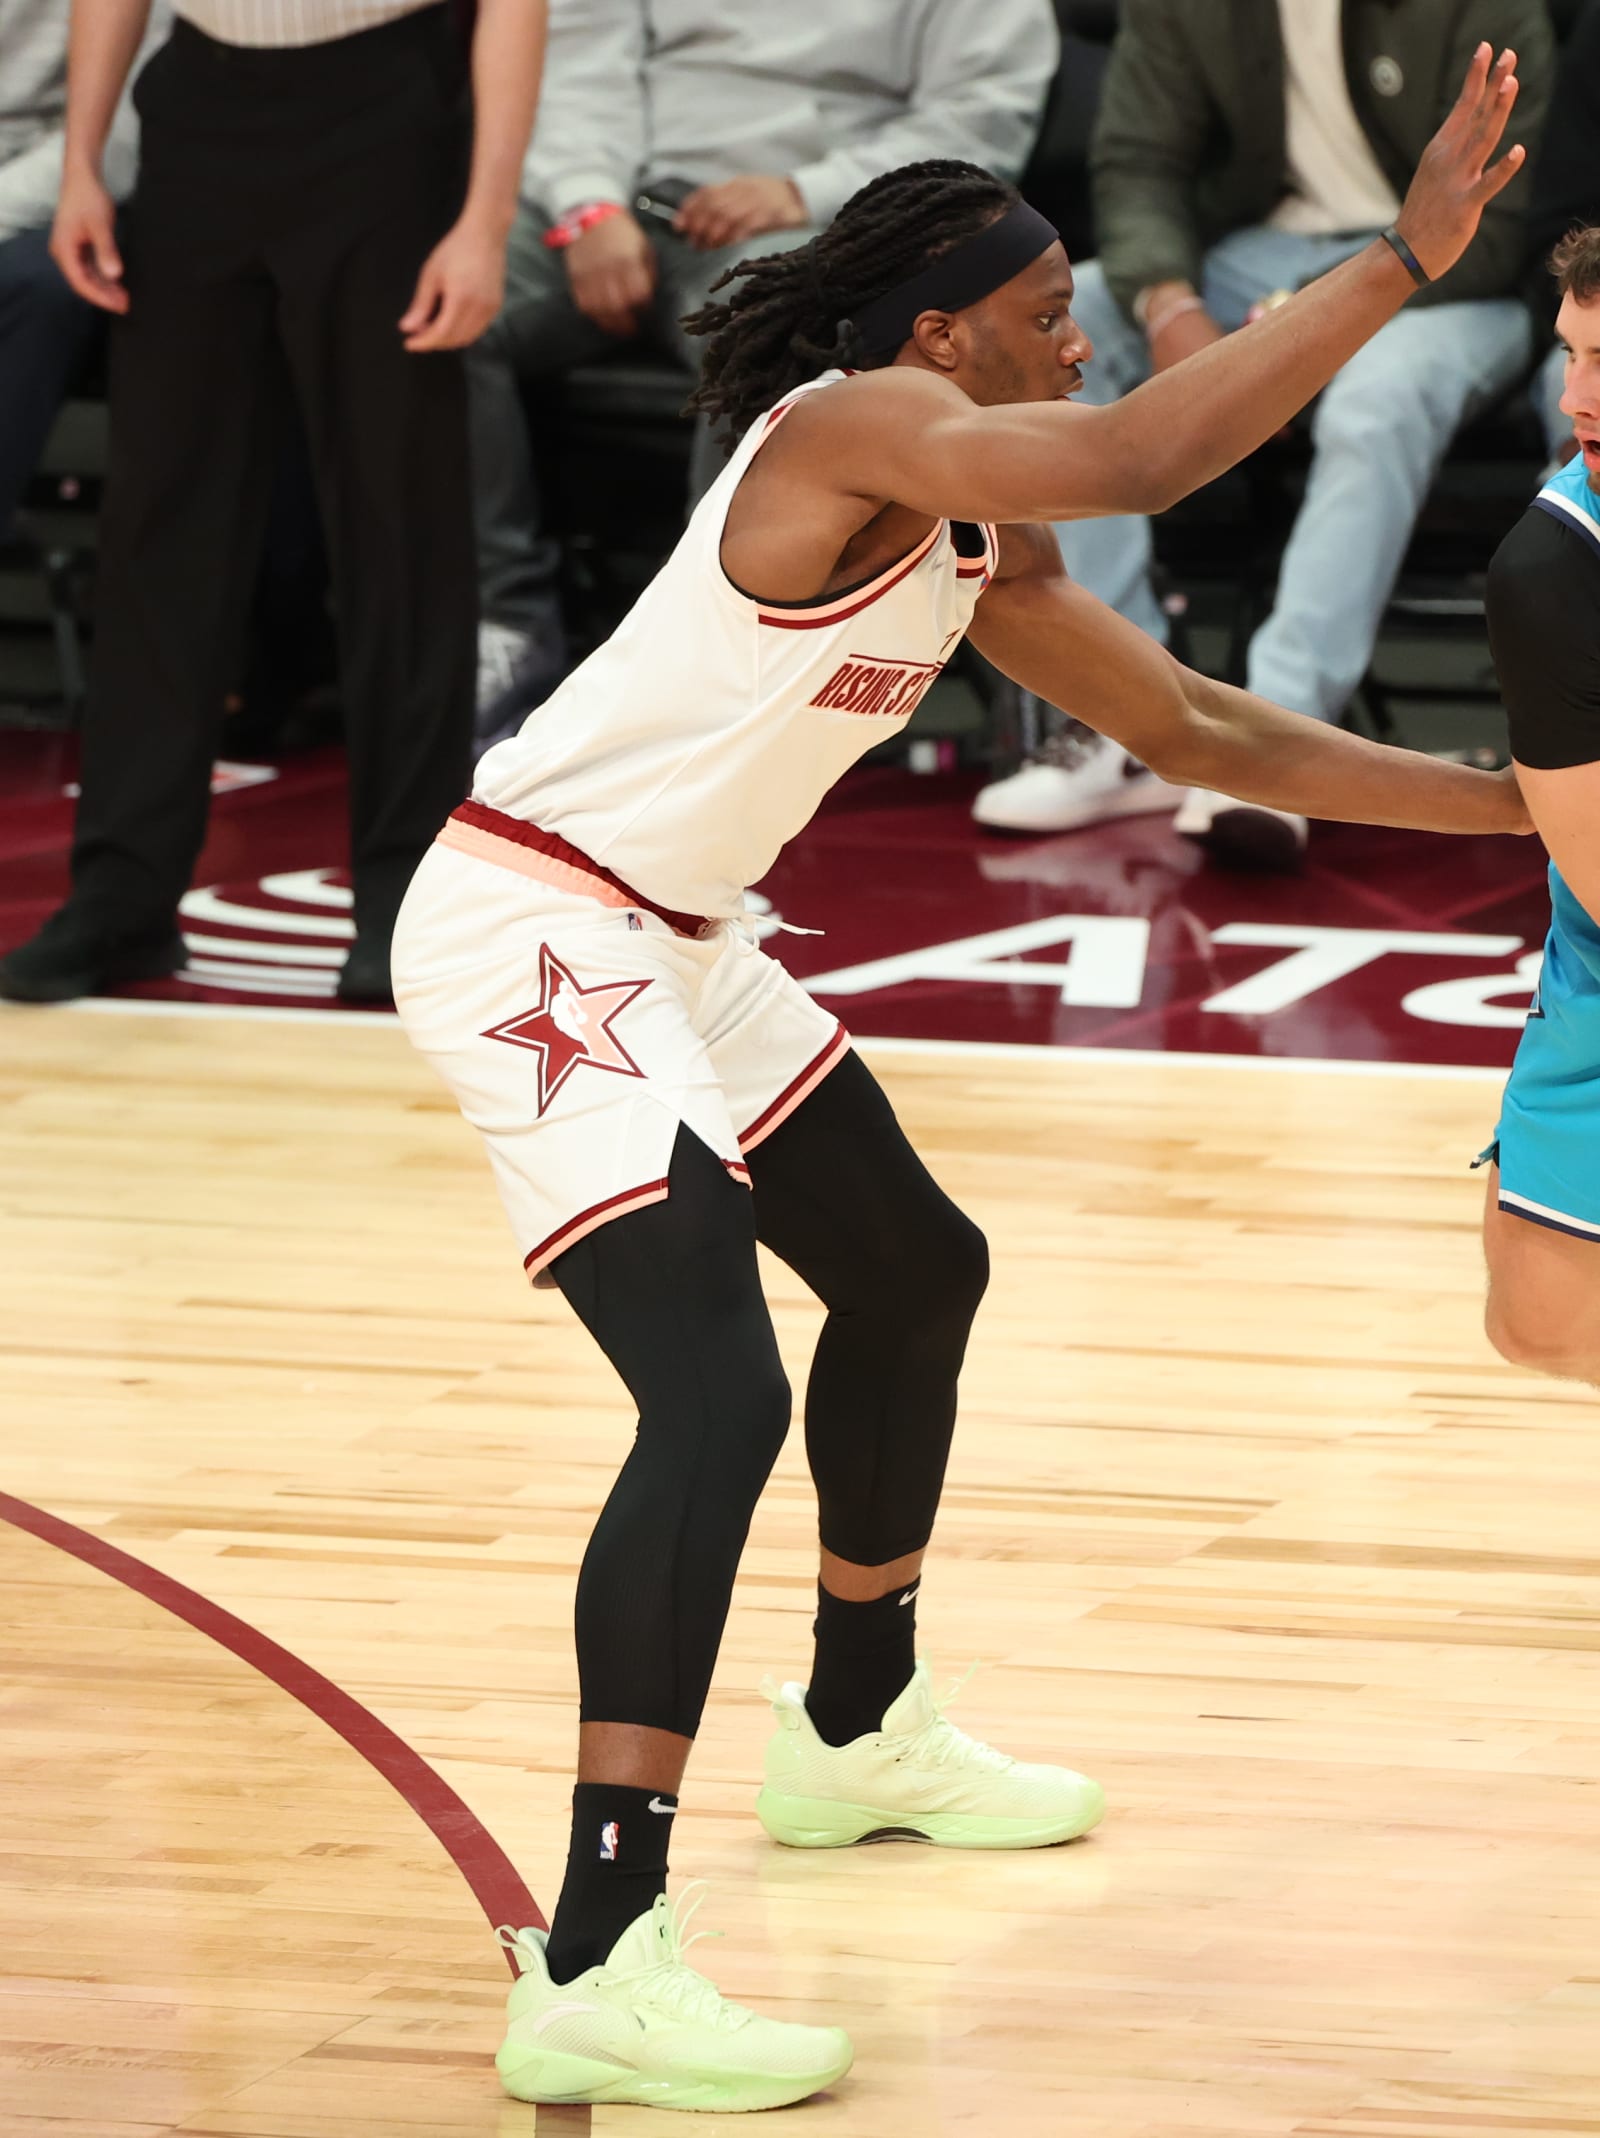 Every Sneaker Worn in the 2023 NBA Rising Stars Game